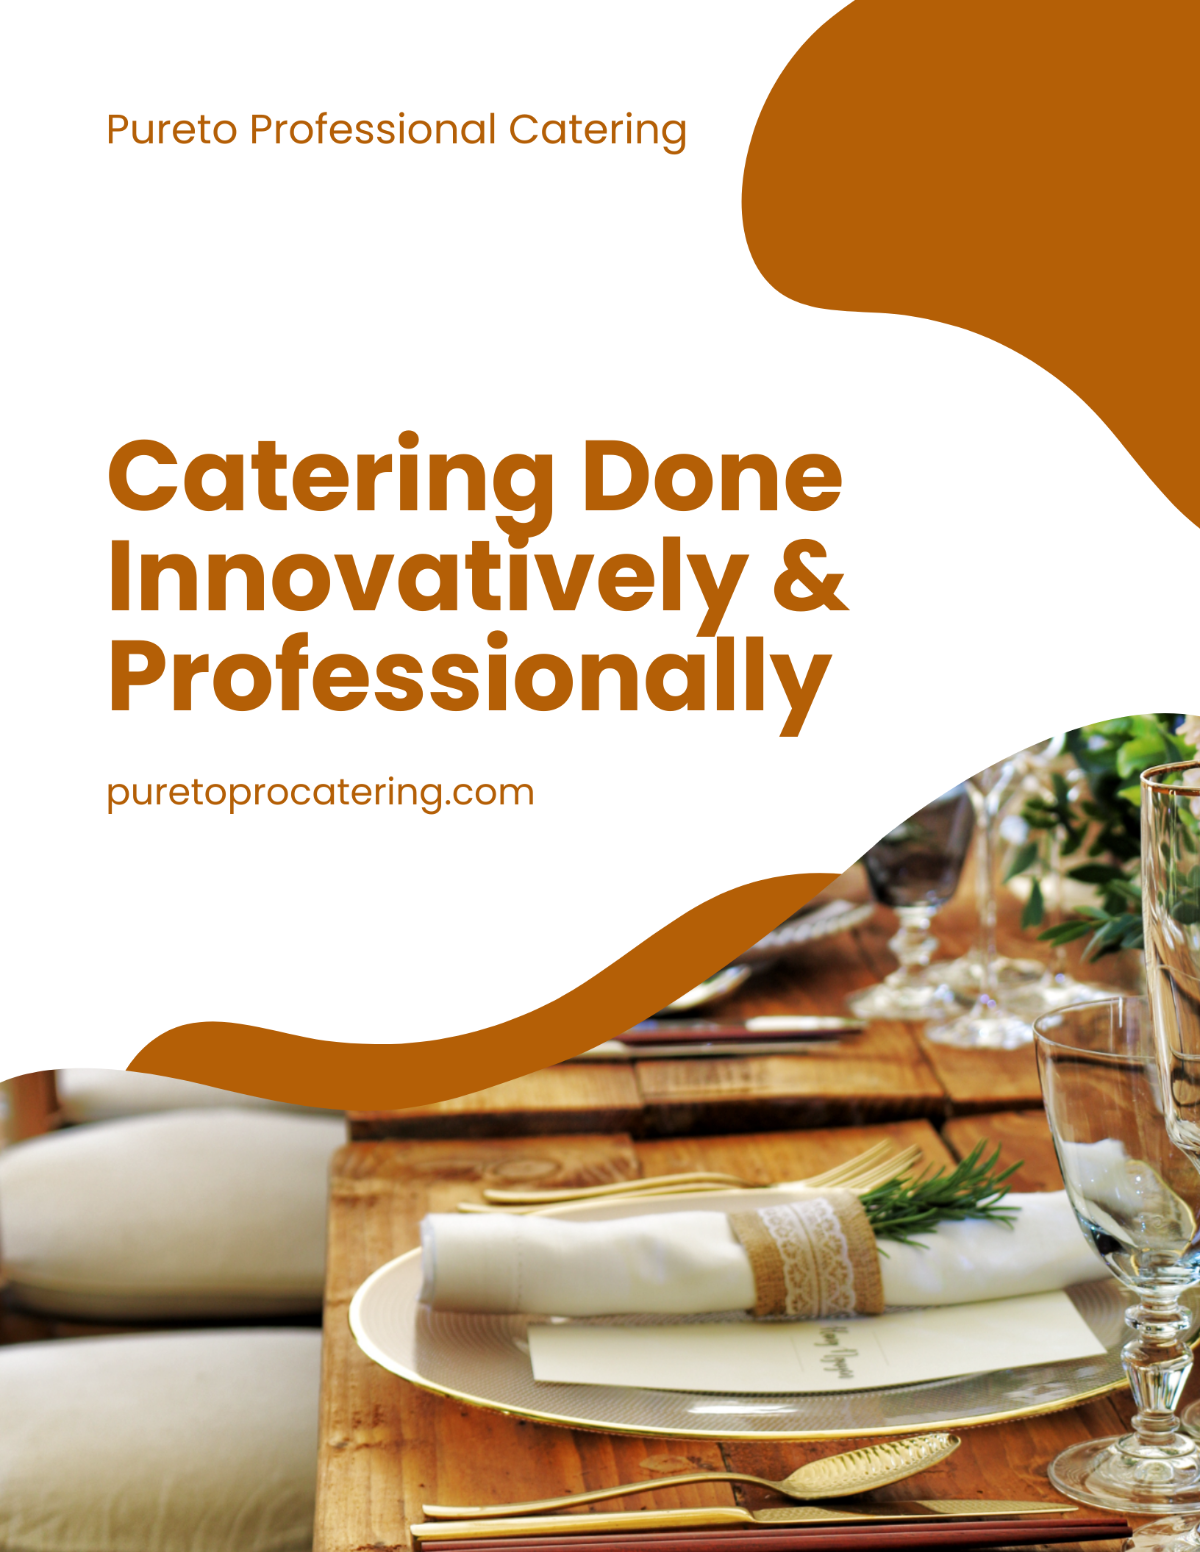 Professional Catering Services Flyer